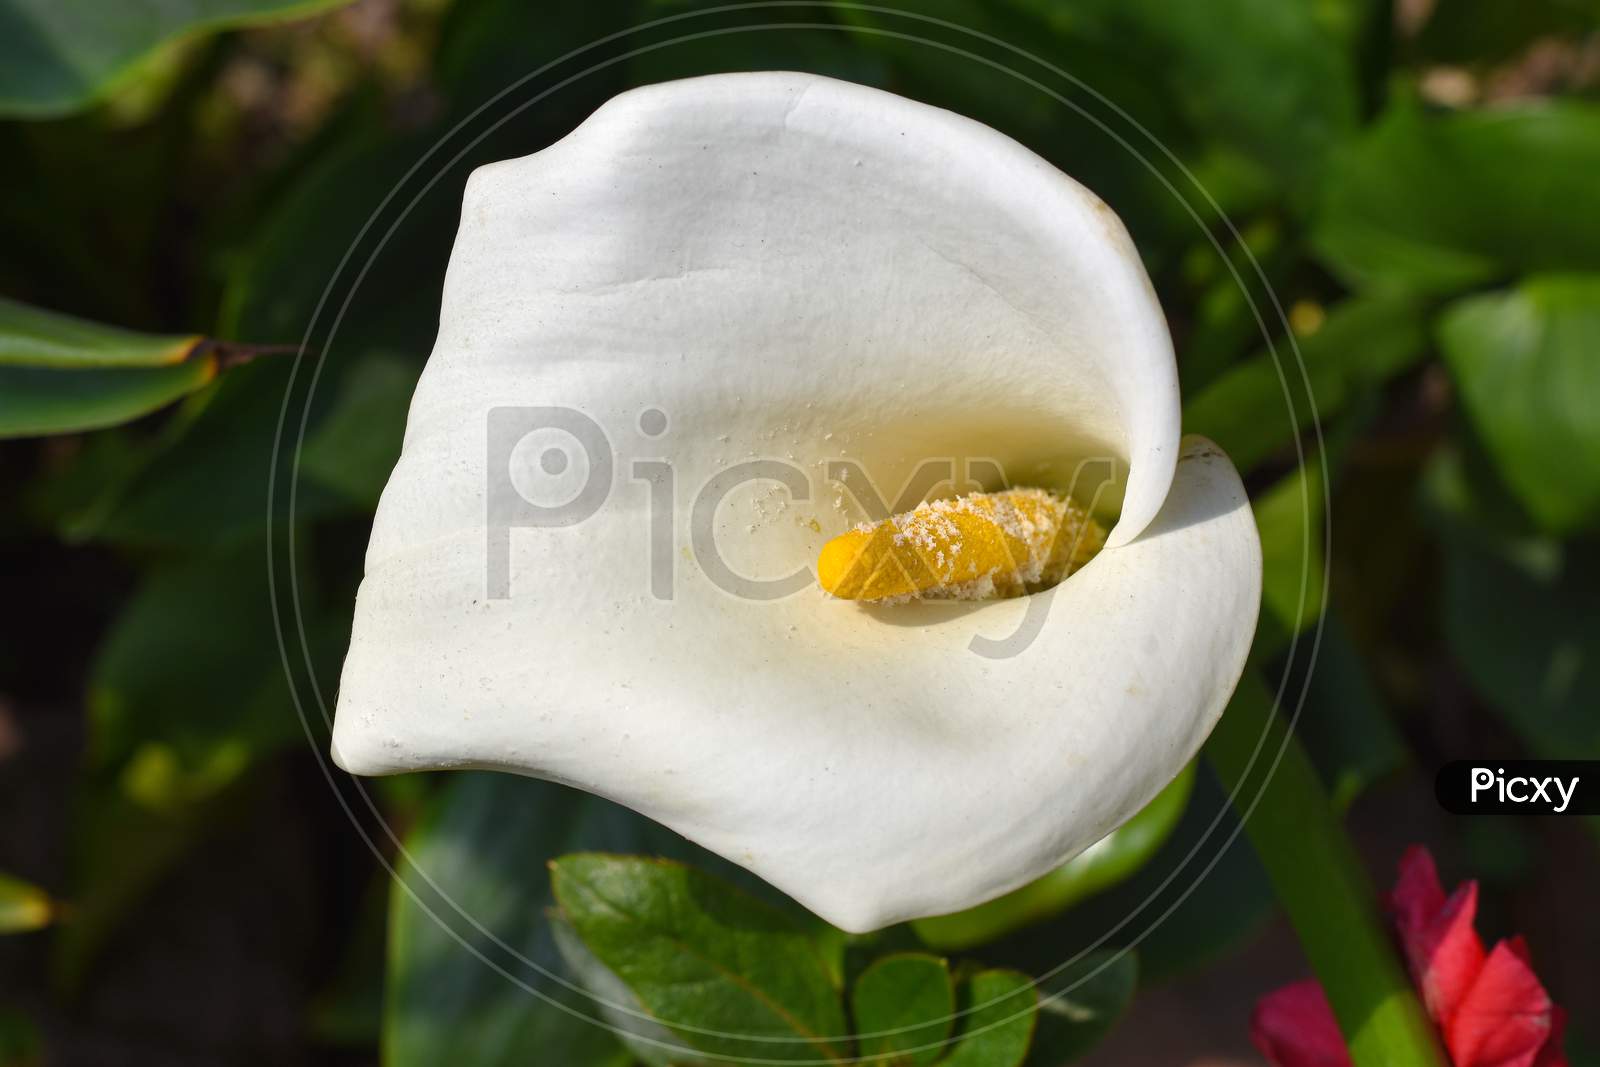 Exotic Bloomed White Calla Lilies